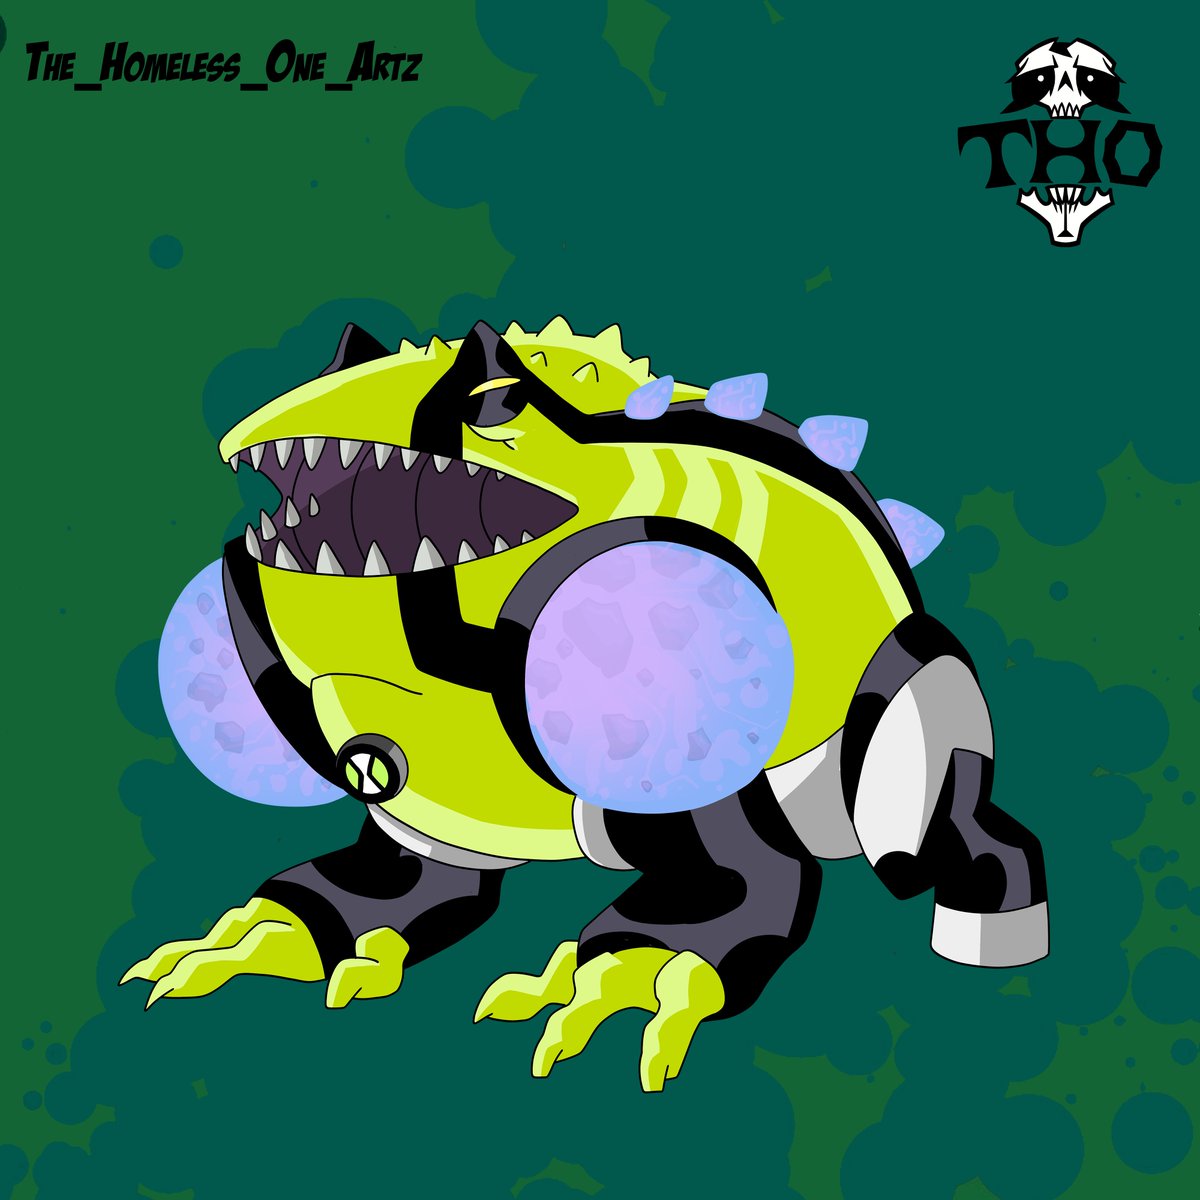 lastly boiling in to action Croak pot he's basically gut rott but liquid form , he can boil chemicals in it's body to create different kinds of goos
#Ben10 #ben10fanart #art #ben10art #ben10redesign #redesign #fanart